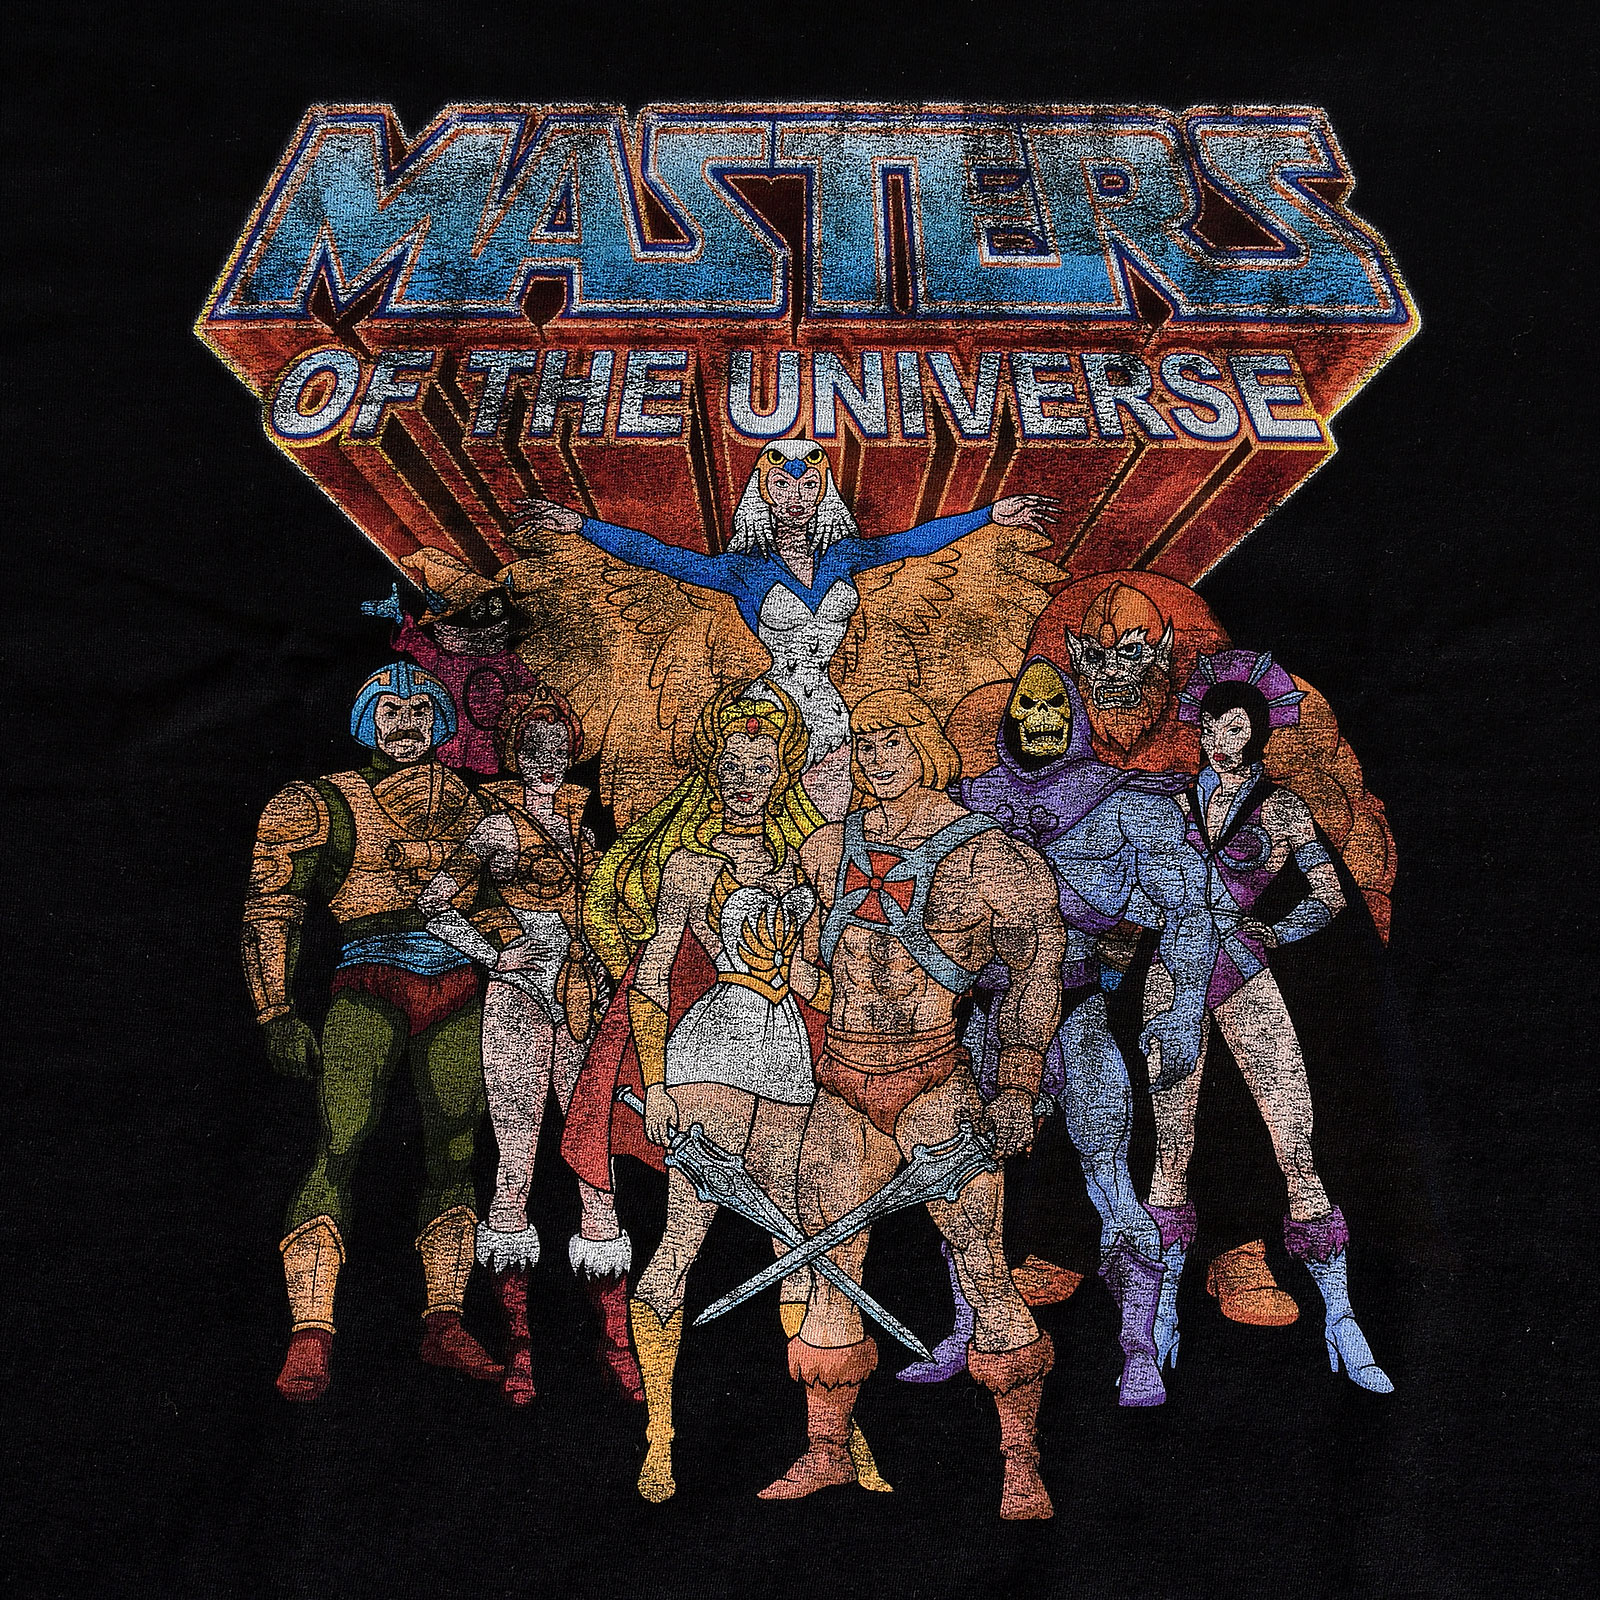 Masters of the Universe - T-shirt Distressed Characters noir